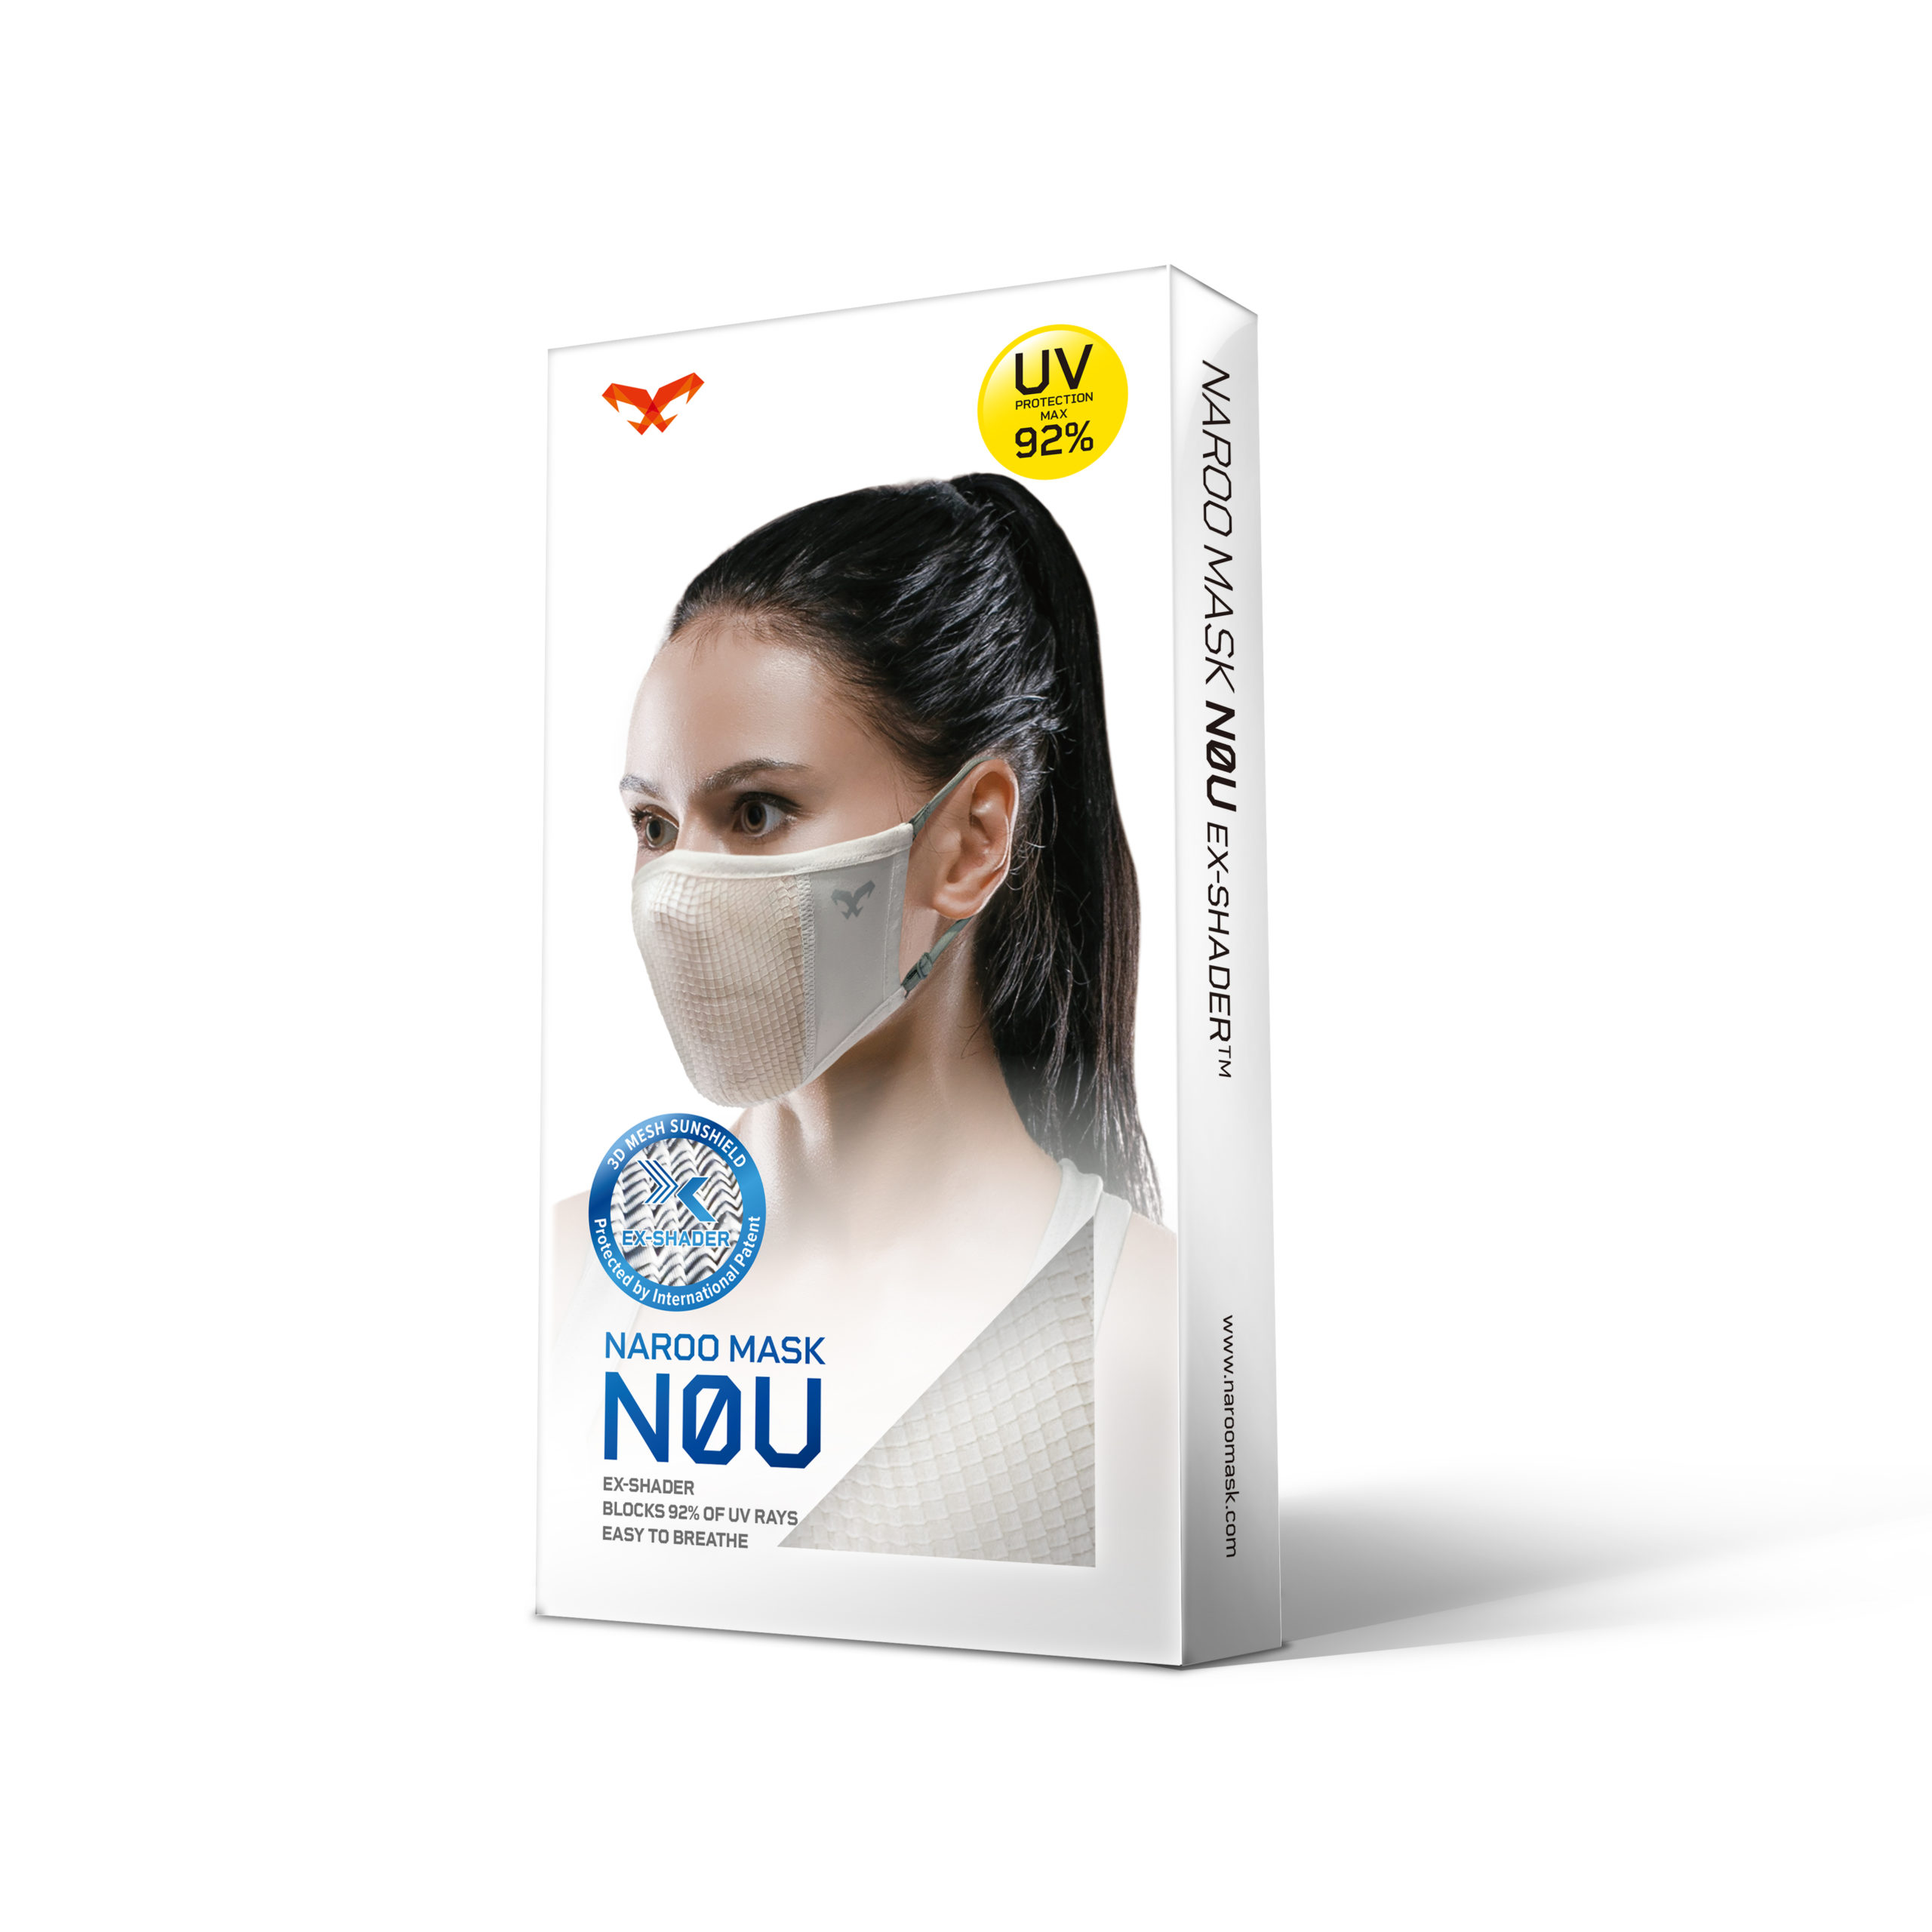 NAROO N0U - package for UV protection sports mask for cycling in the summer and spring